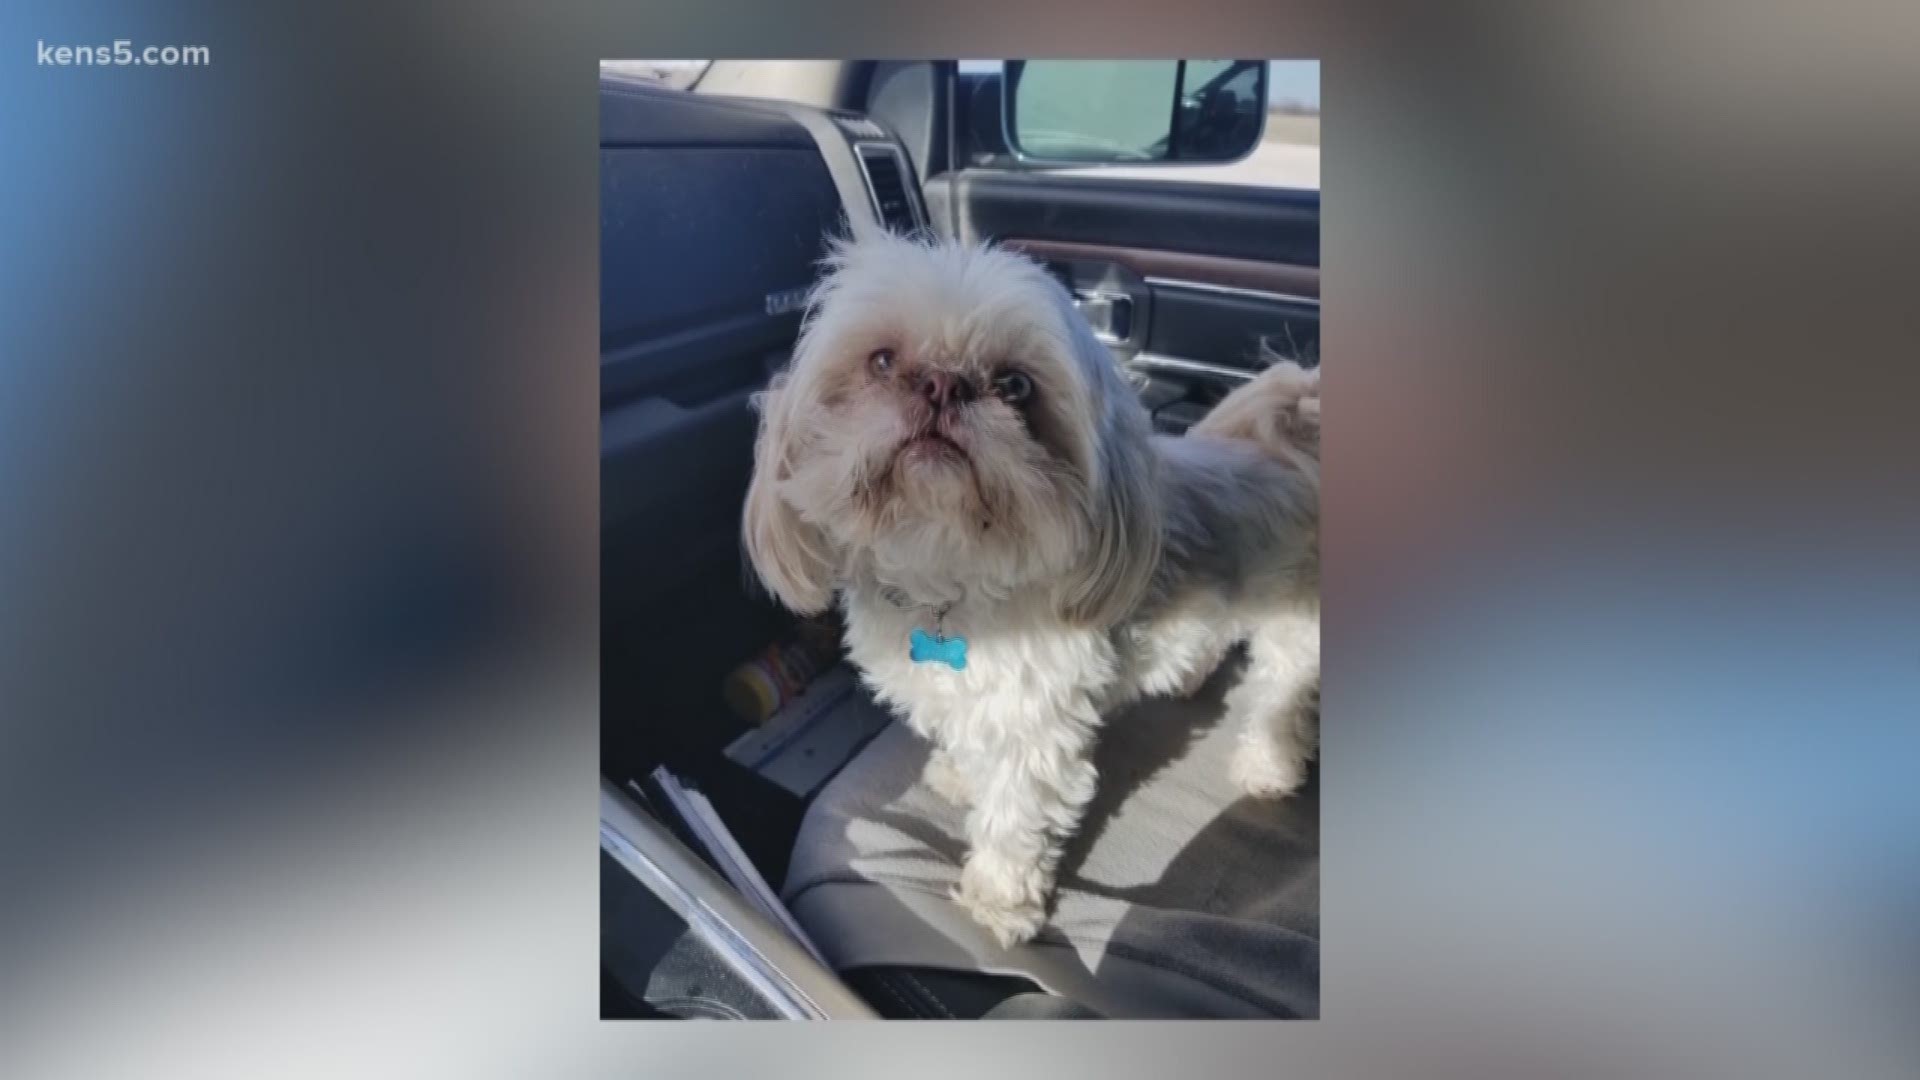 A Bandera County man is mourning the loss of his 9-year-old dog named BG after he found his home burglarized and his dog dead in a neighbor’s yard. His ex-wife, Heidi Nichole Carpenter, has been charged with trespassing, burglary, and animal cruelty.